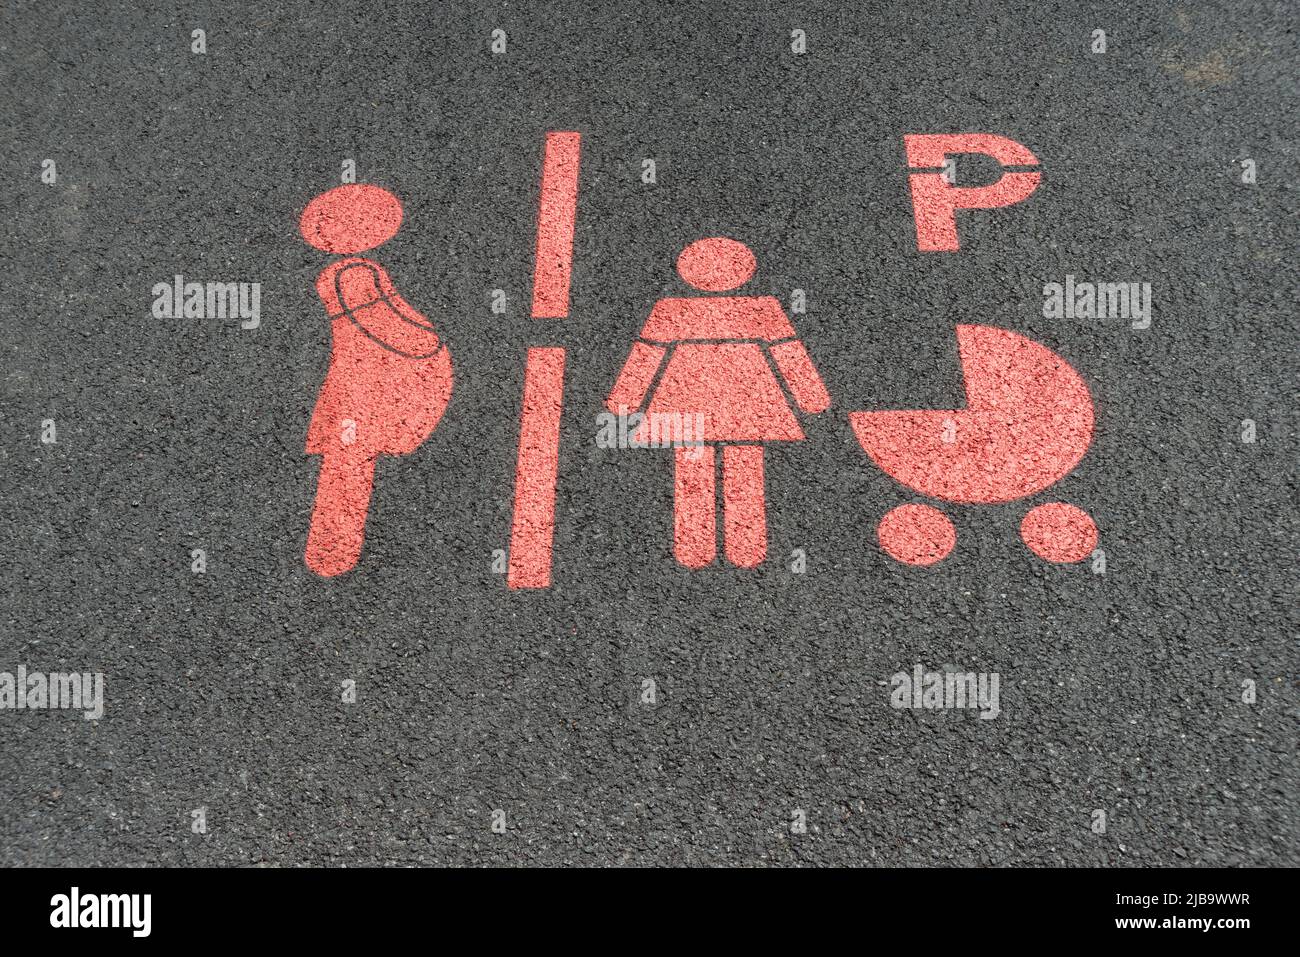 Italy, Lombardy, Sign for Parking Space Reserved for Pregnant Women and Mothers with Babies Stock Photo